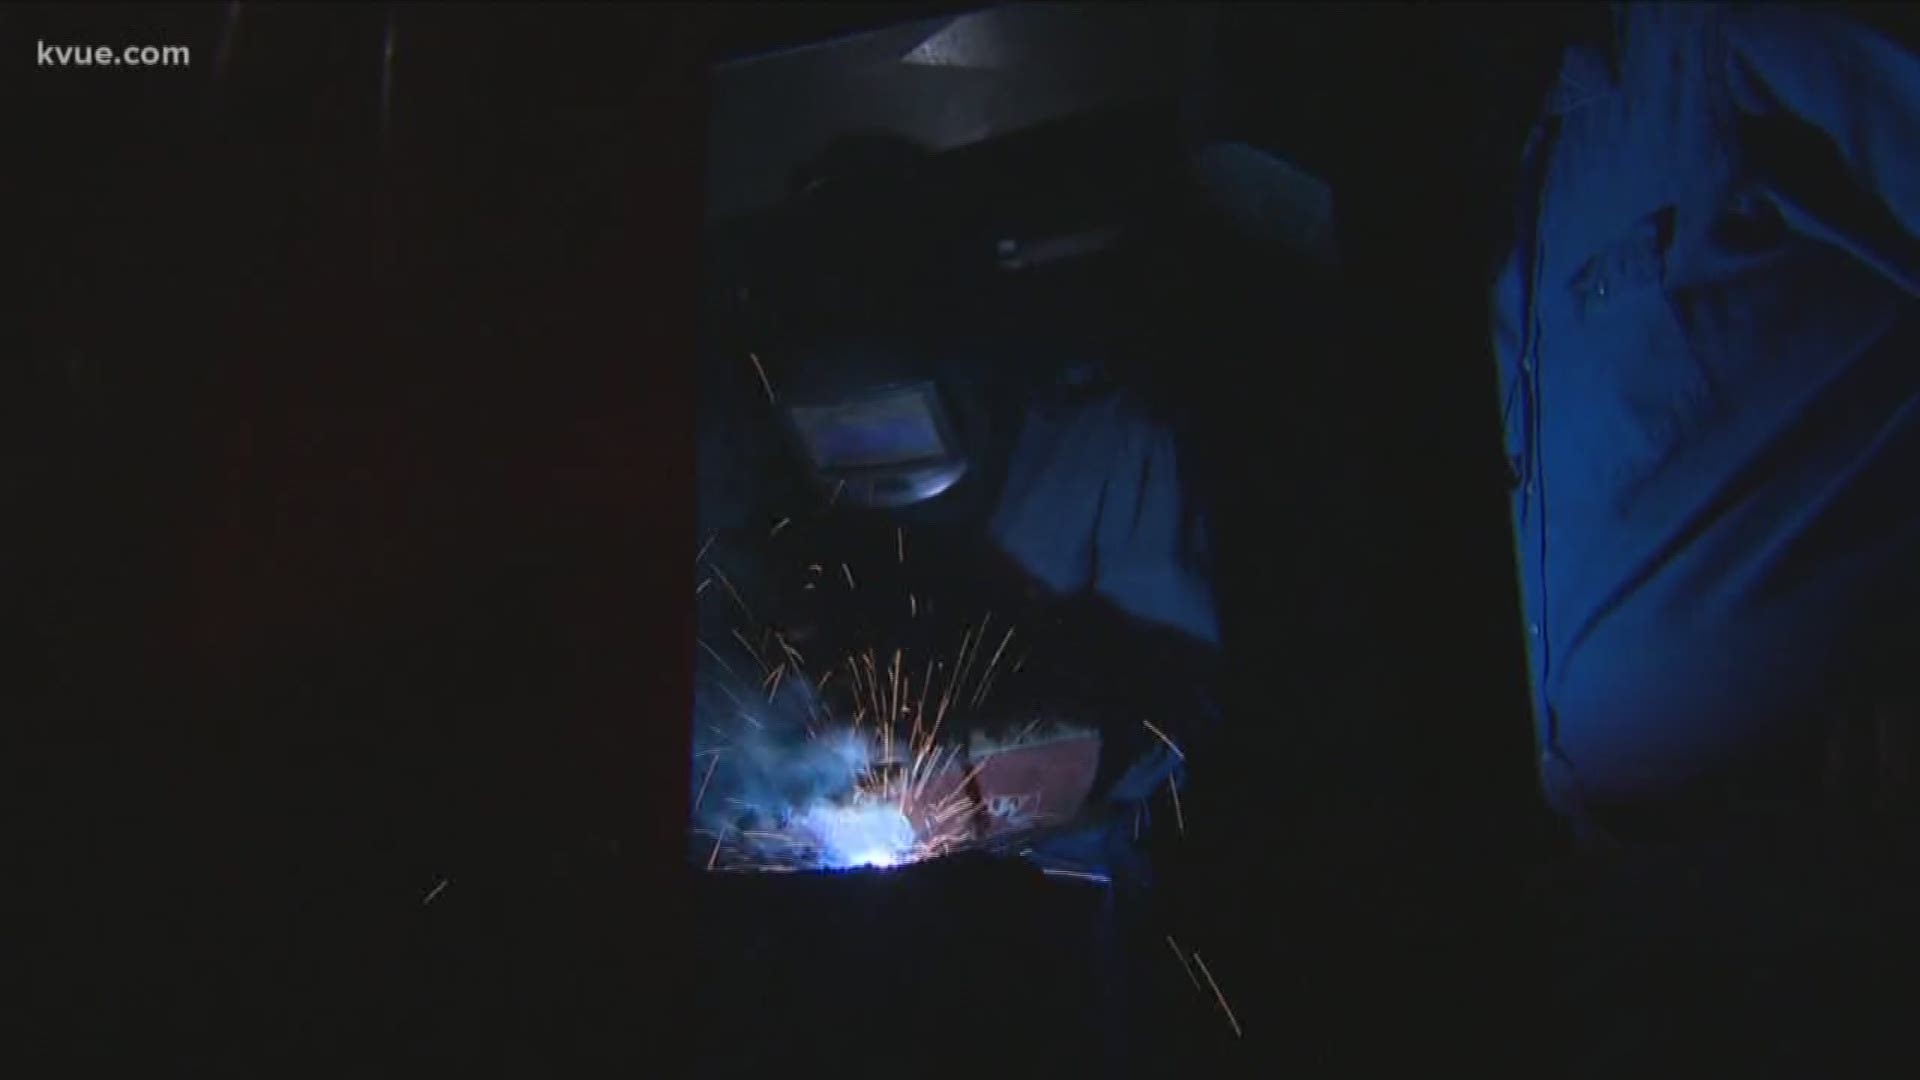 We're highlighting some interesting ways Central Texas schools are getting kids out of traditional classrooms. Recently, we traveled to Elgin, where a high school program is sparking students' interest in welding.